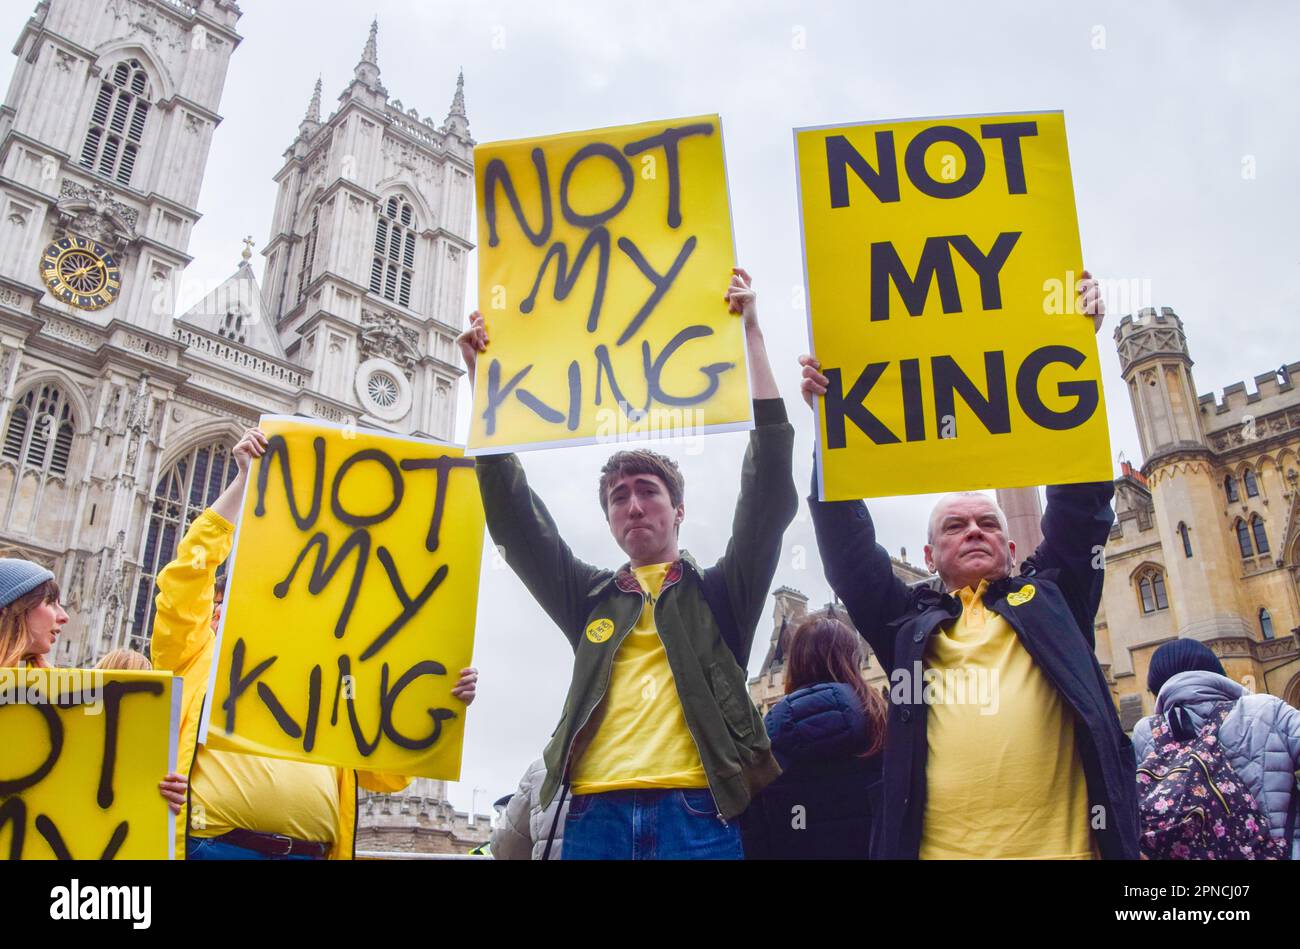 London, UK. 13th March 2023. Anti-monarchy protesters gathered with Not My King signs outside Westminster Abbey as King Charles III and other members of the royal family arrived for the Commonwealth Day Service. Stock Photo